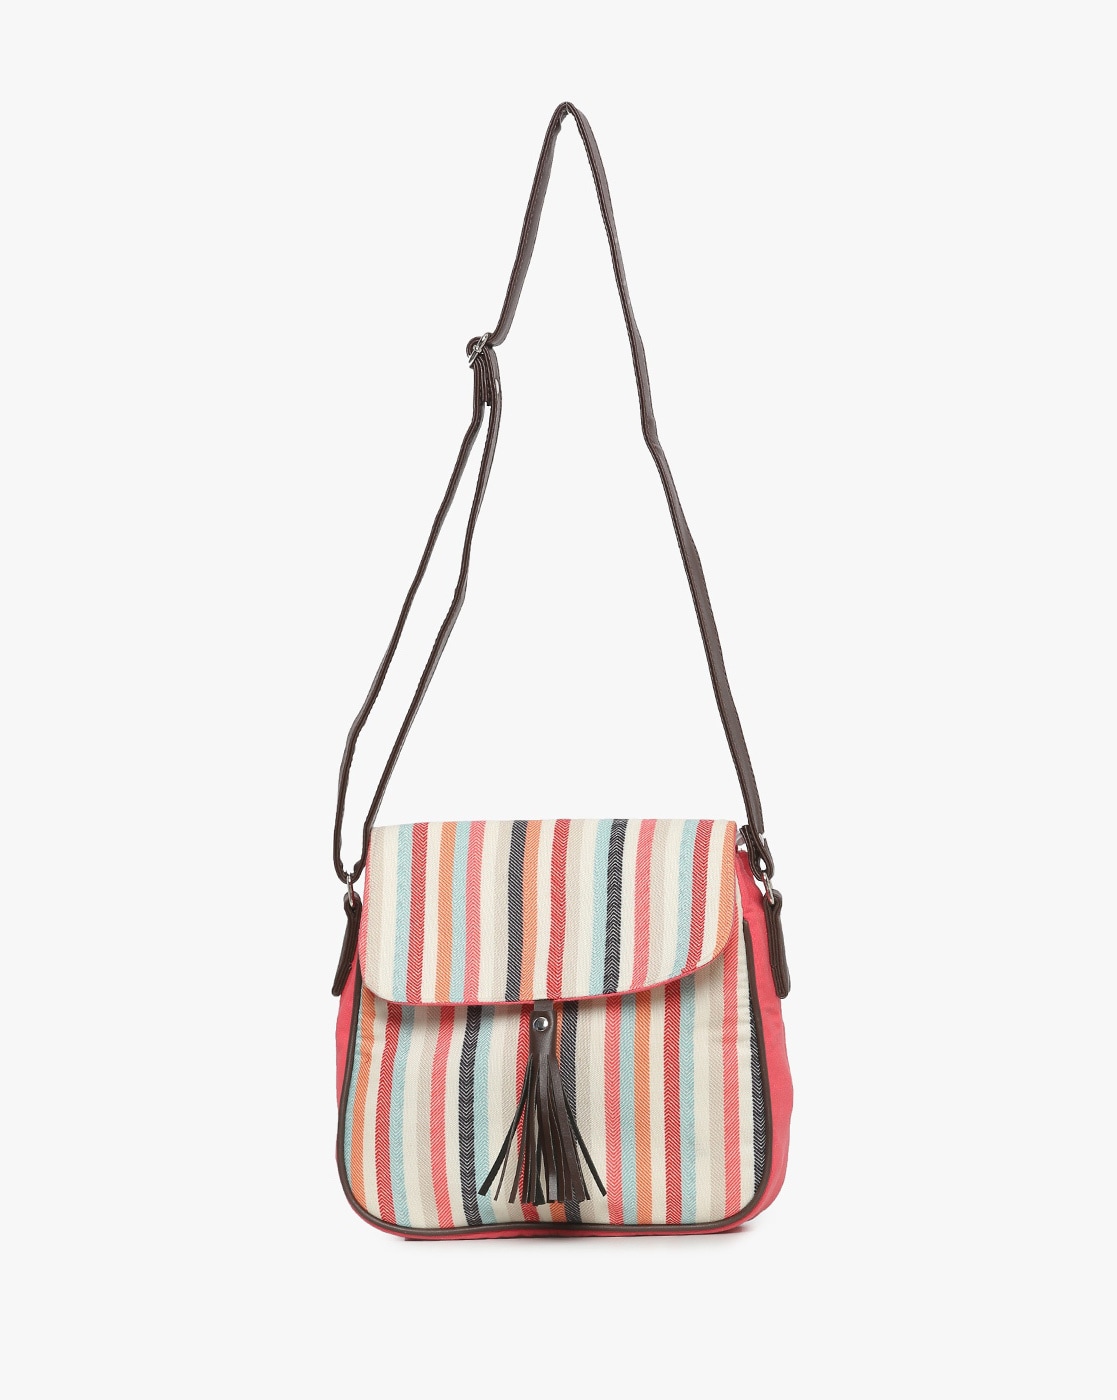 Chandrakala Recommends : DNMX Striped Sling Bag with Flap Closure